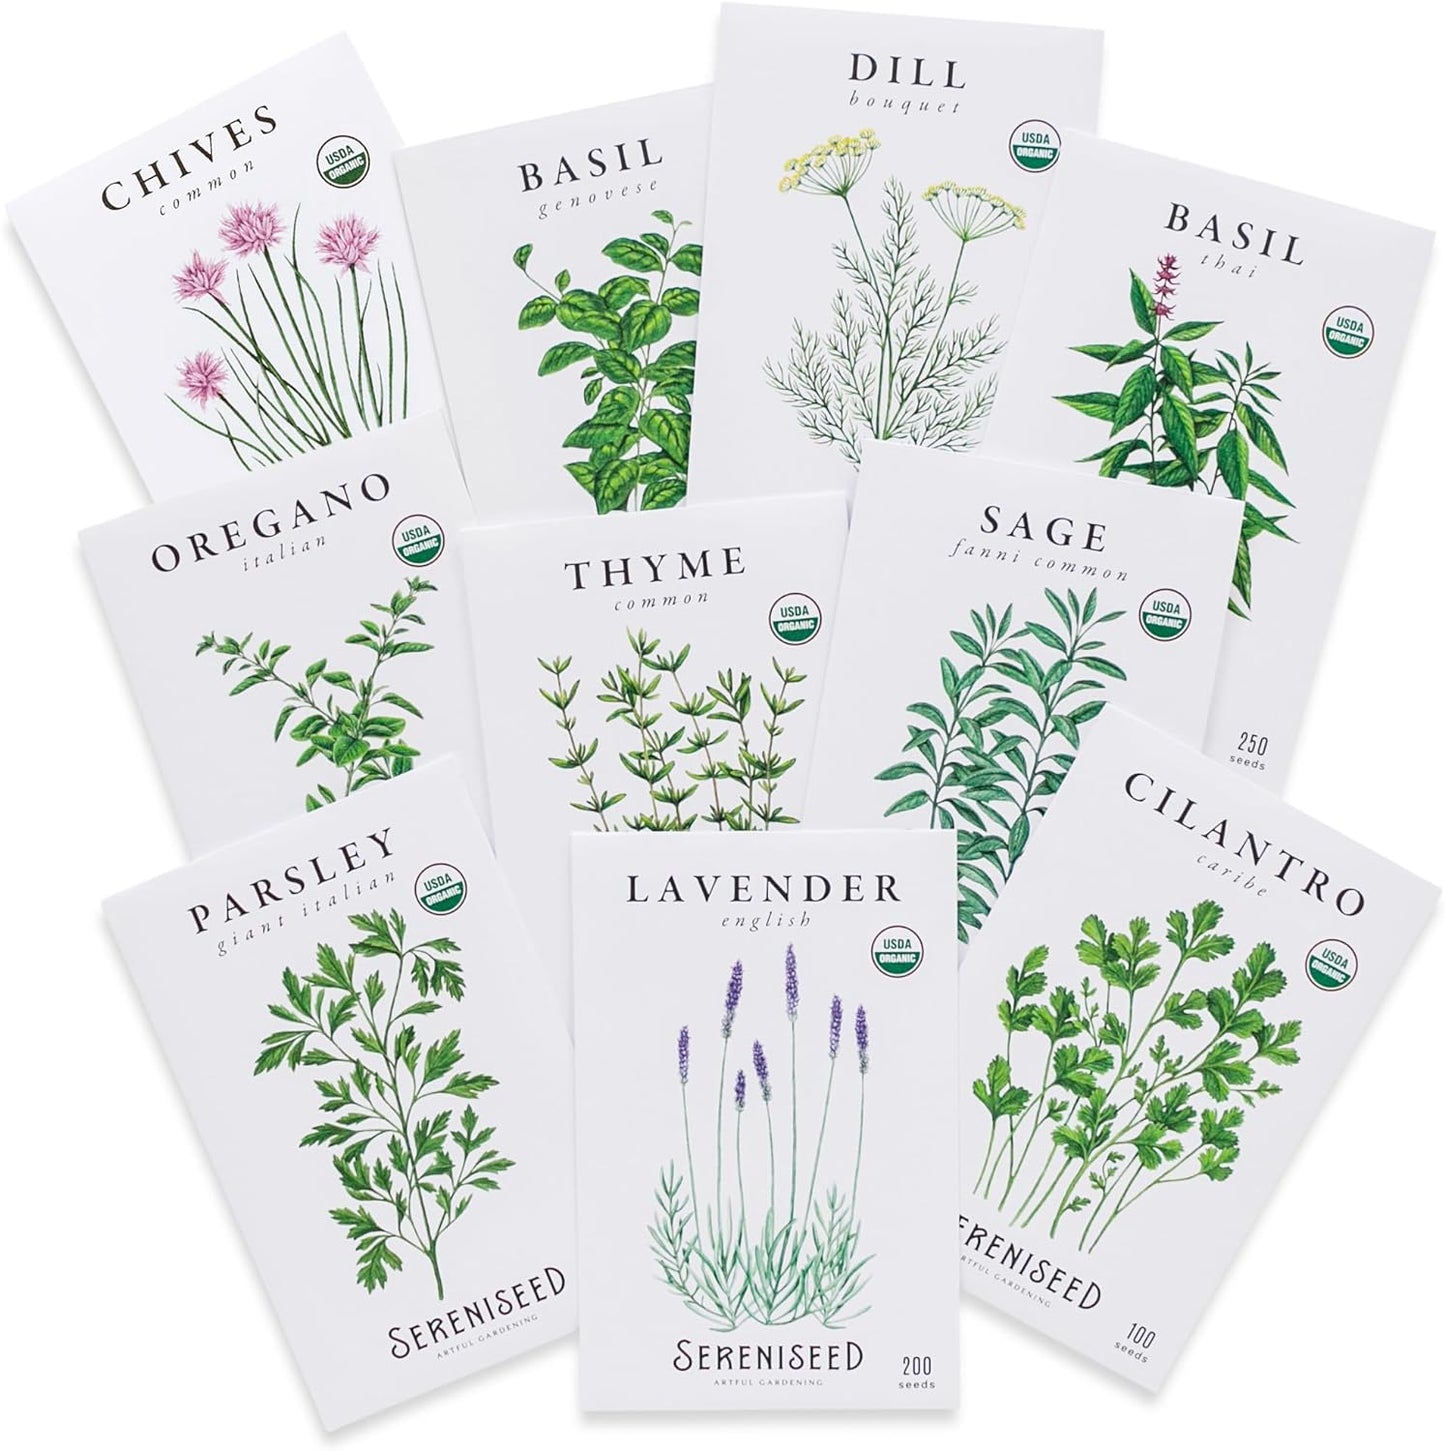 Certified Organic Herb Seeds (10-Pack) – Non GMO, Heirloom – Seed Starting Video - Basil, Cilantro, Oregano, Thyme, Parsley, Lavender, Chives, Sage, Dill Seeds for Indoor & Outdoor Planting